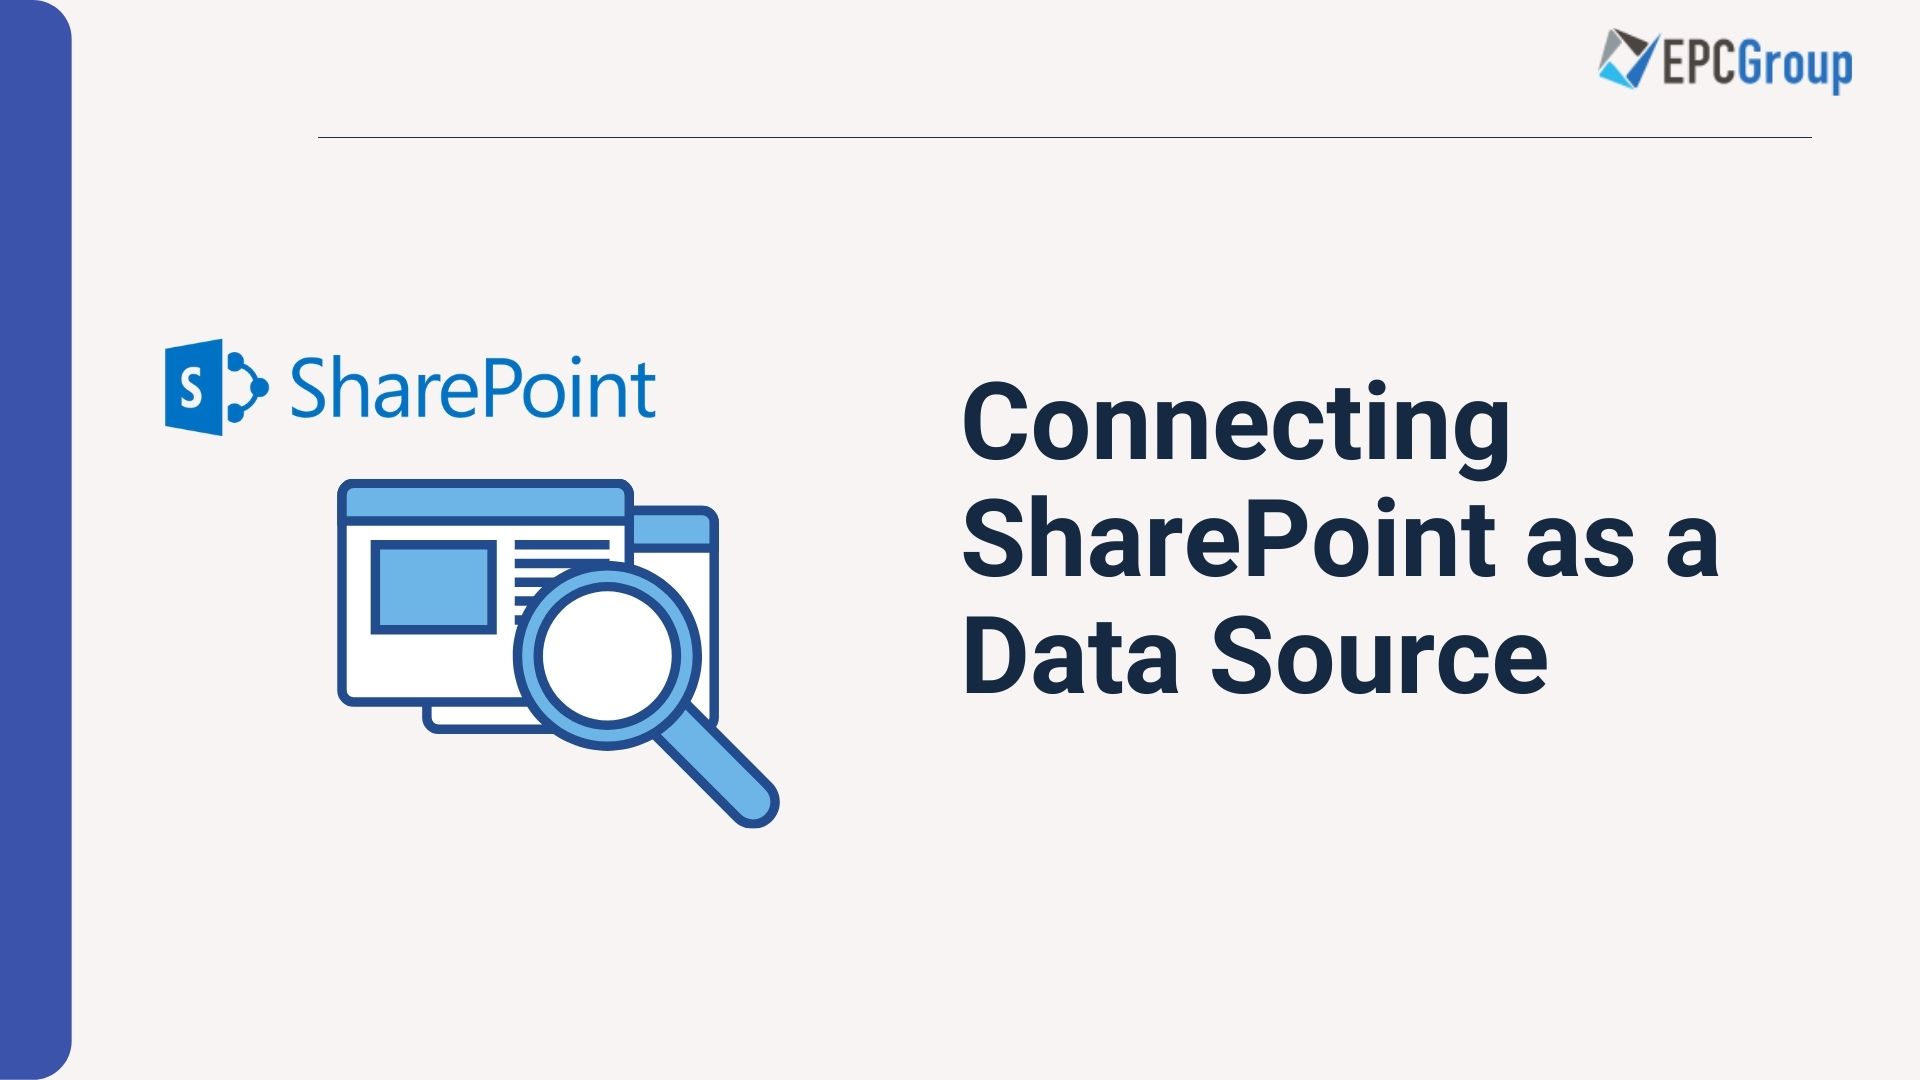 Configuring and Connecting SharePoint as a Data Source